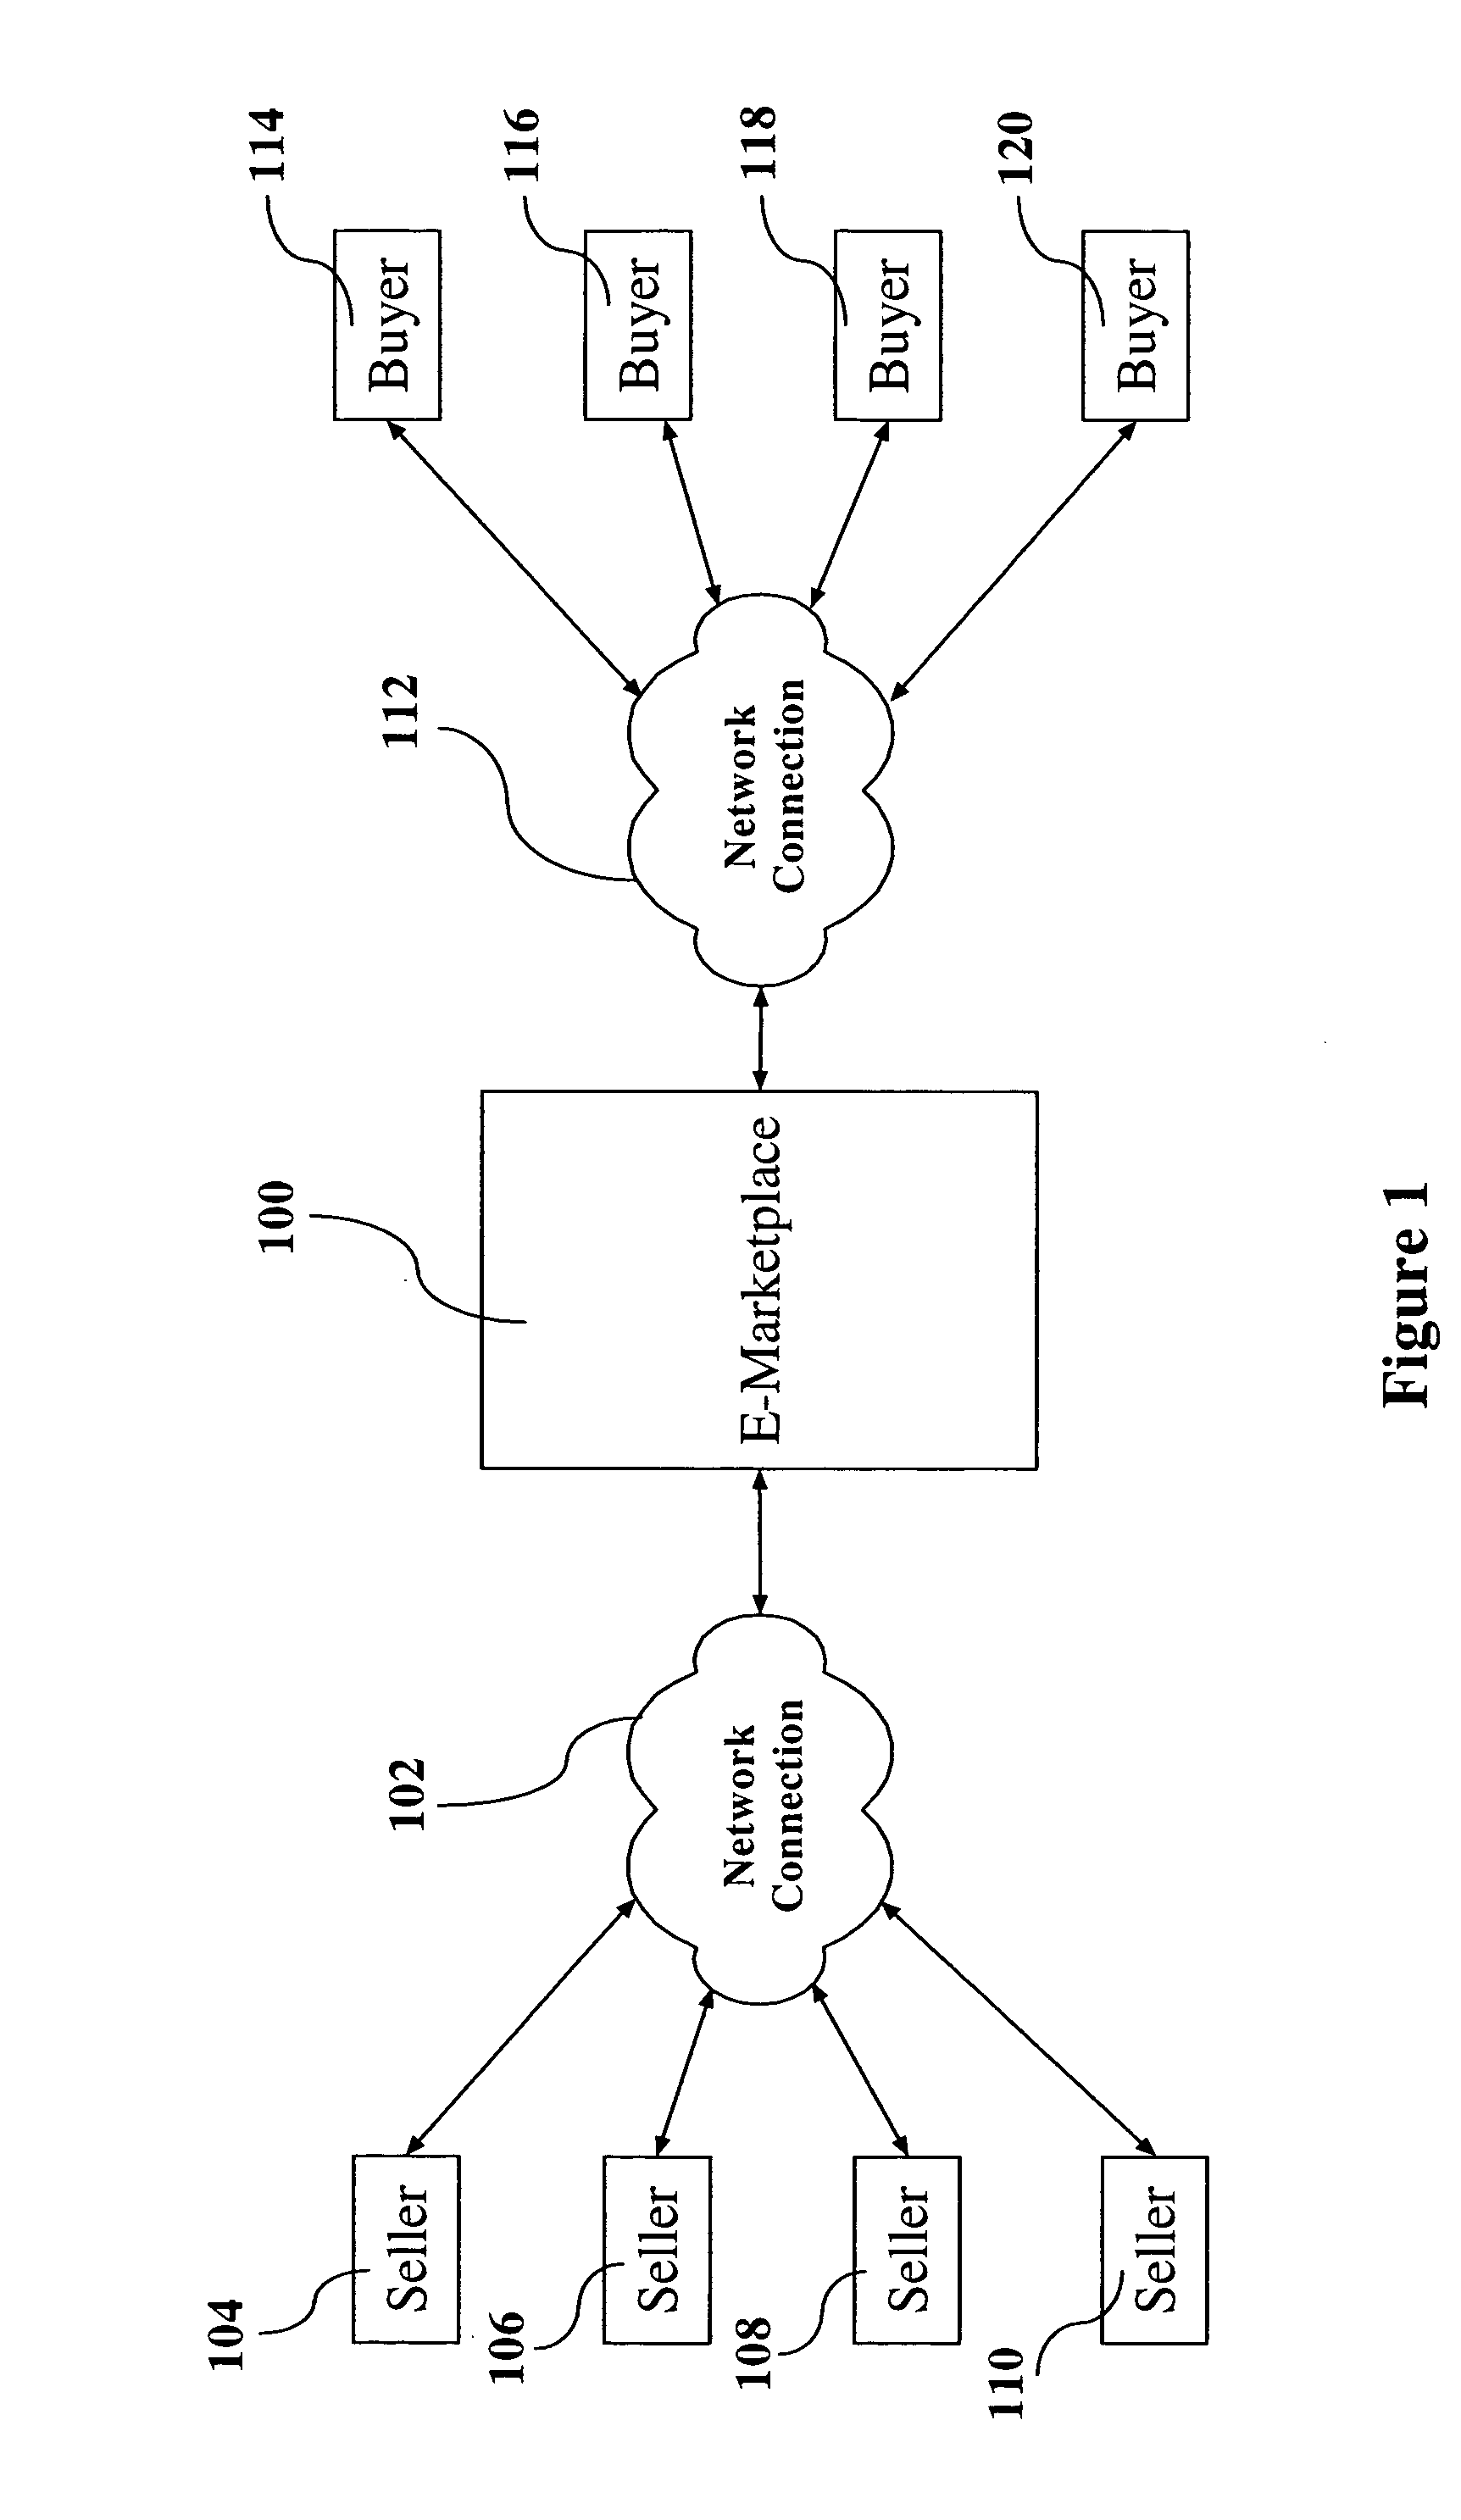 Method, system, and computer program product for filtering participants in electronic transactions using privacy policies